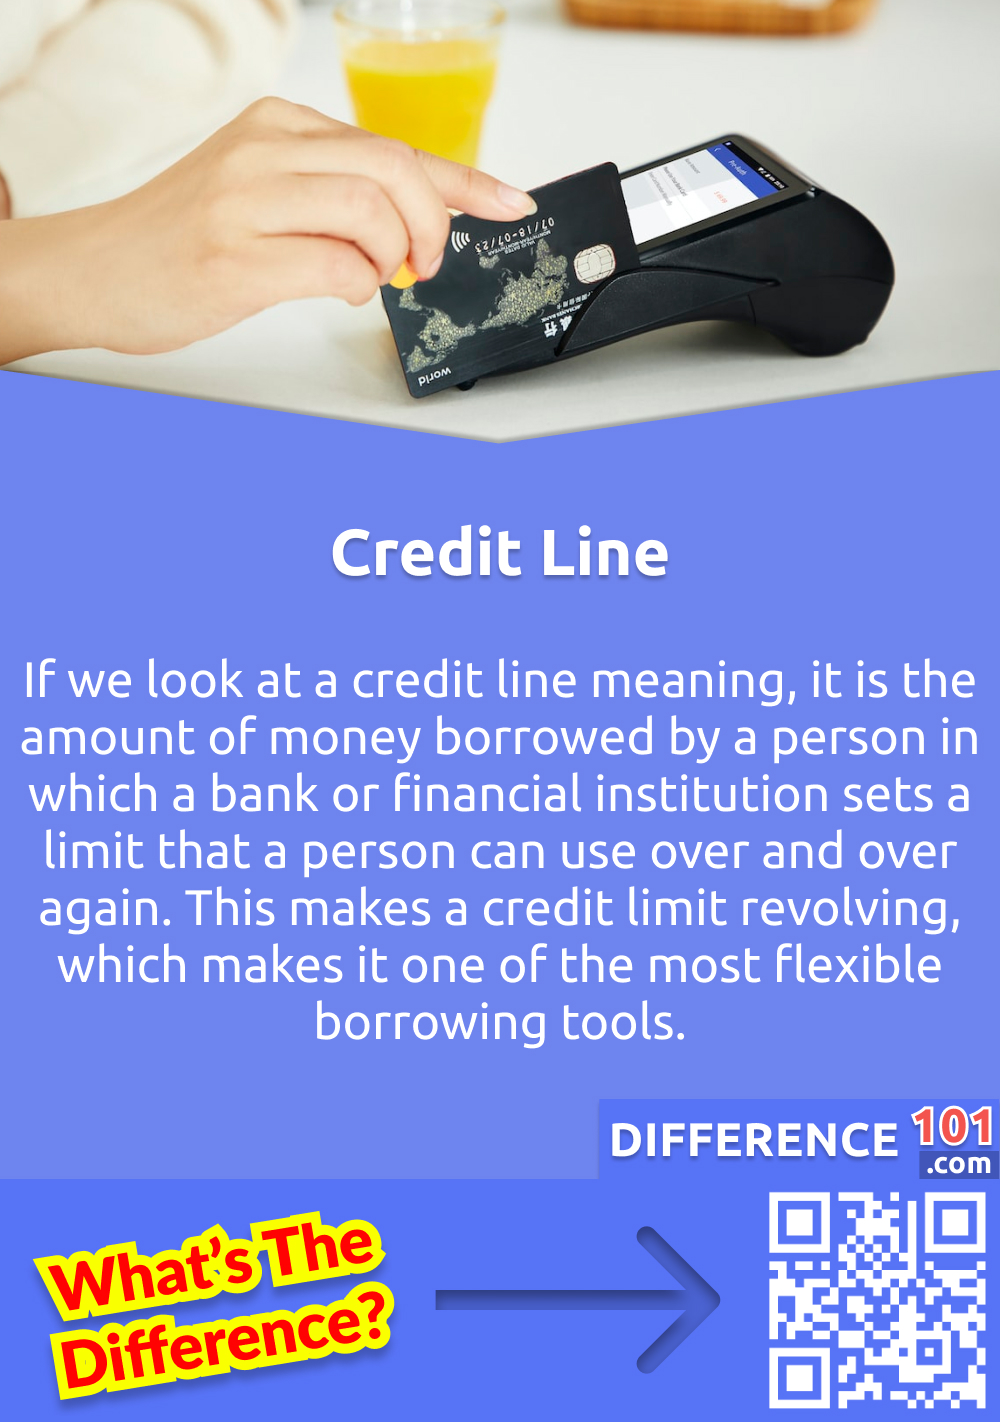 What Is A Credit Line? If we look at a credit line meaning, it is the amount of money borrowed by a person in which a bank or financial institution sets a limit that a person can use over and over again. This makes a credit limit revolving, which makes it one of the most flexible borrowing tools. Unlike loans, credit lines can be used for many purposes like everyday purchases, small renovations, managing trips and paying high interests debts. A person's credit line works similarly to his credit card, and the person can use the funds whenever he needs them as long as the credit is available. But credit lines have higher interest rates as compared to a loan. The payment method is monthly and made up of both interest and principal. The credit line of a person has an impact on his credit reports and credit scores as well.